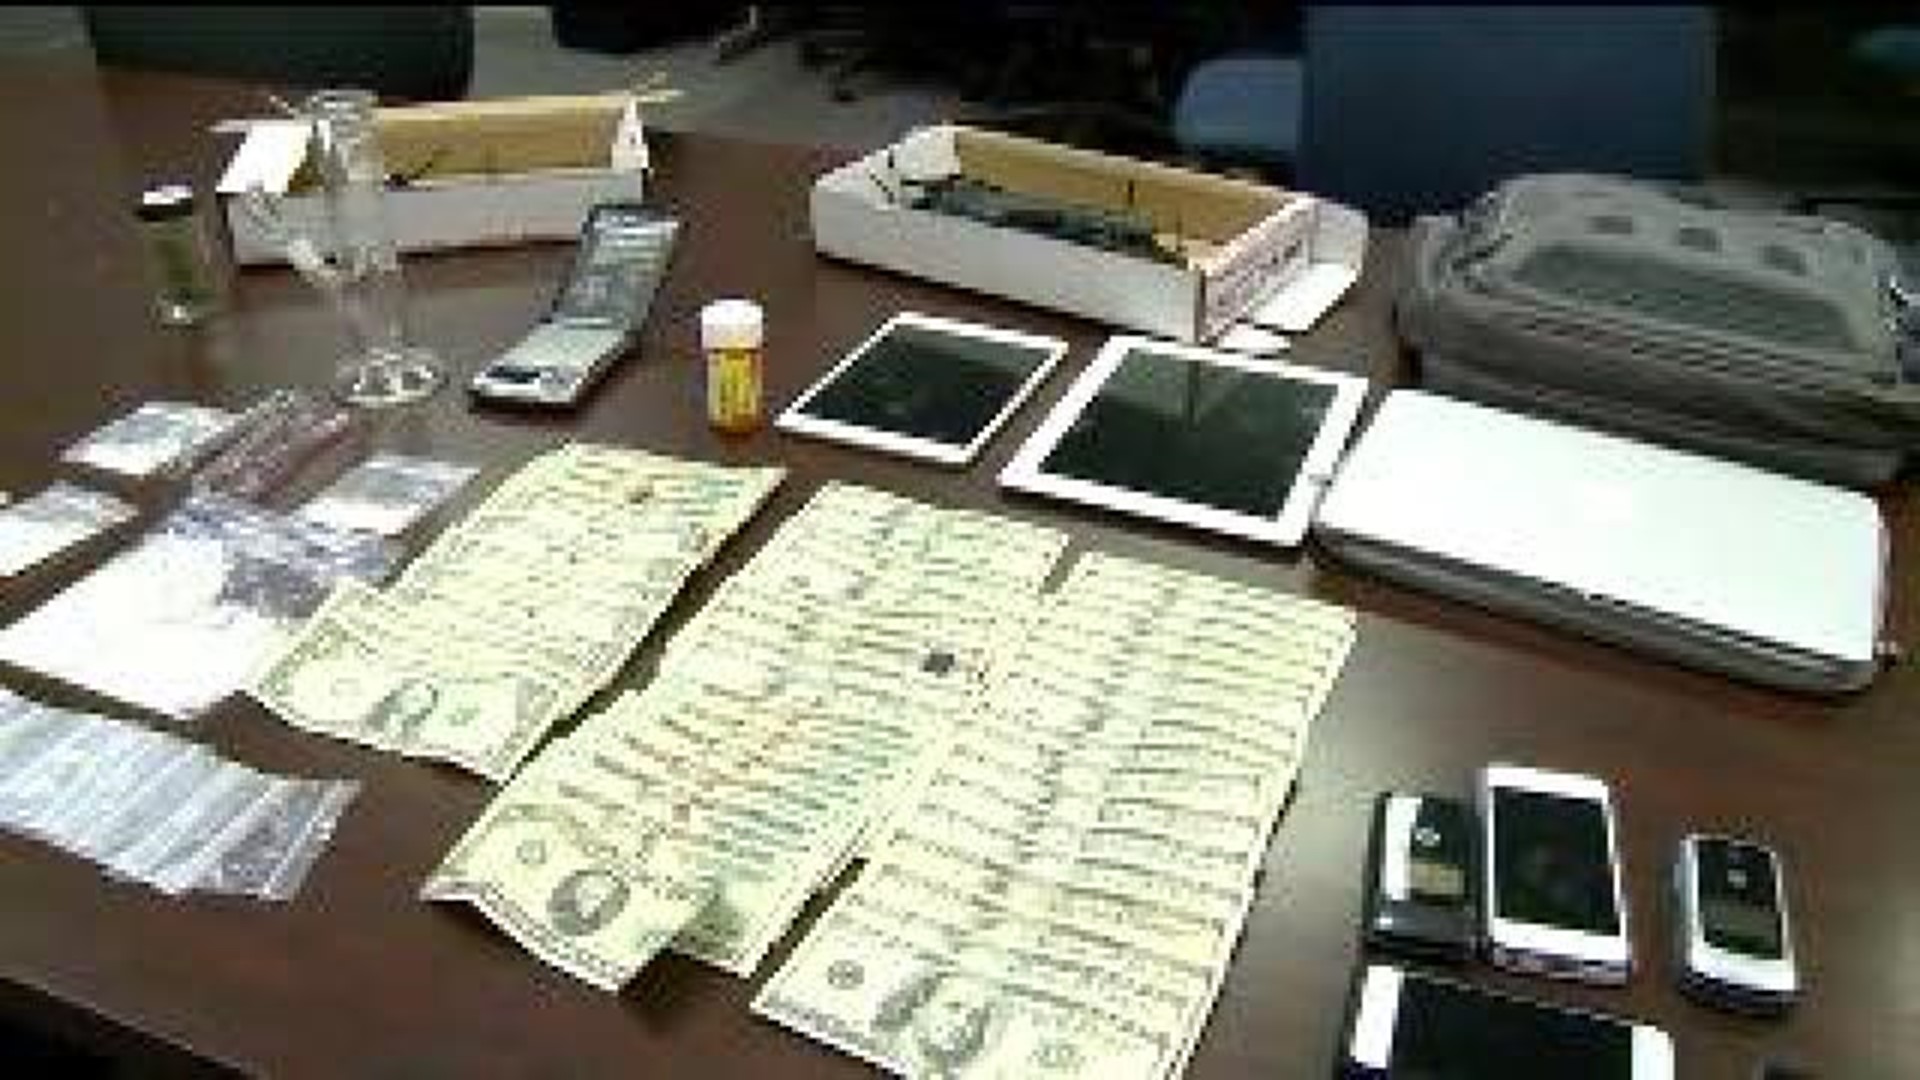 Benton County Busy With Drug Busts